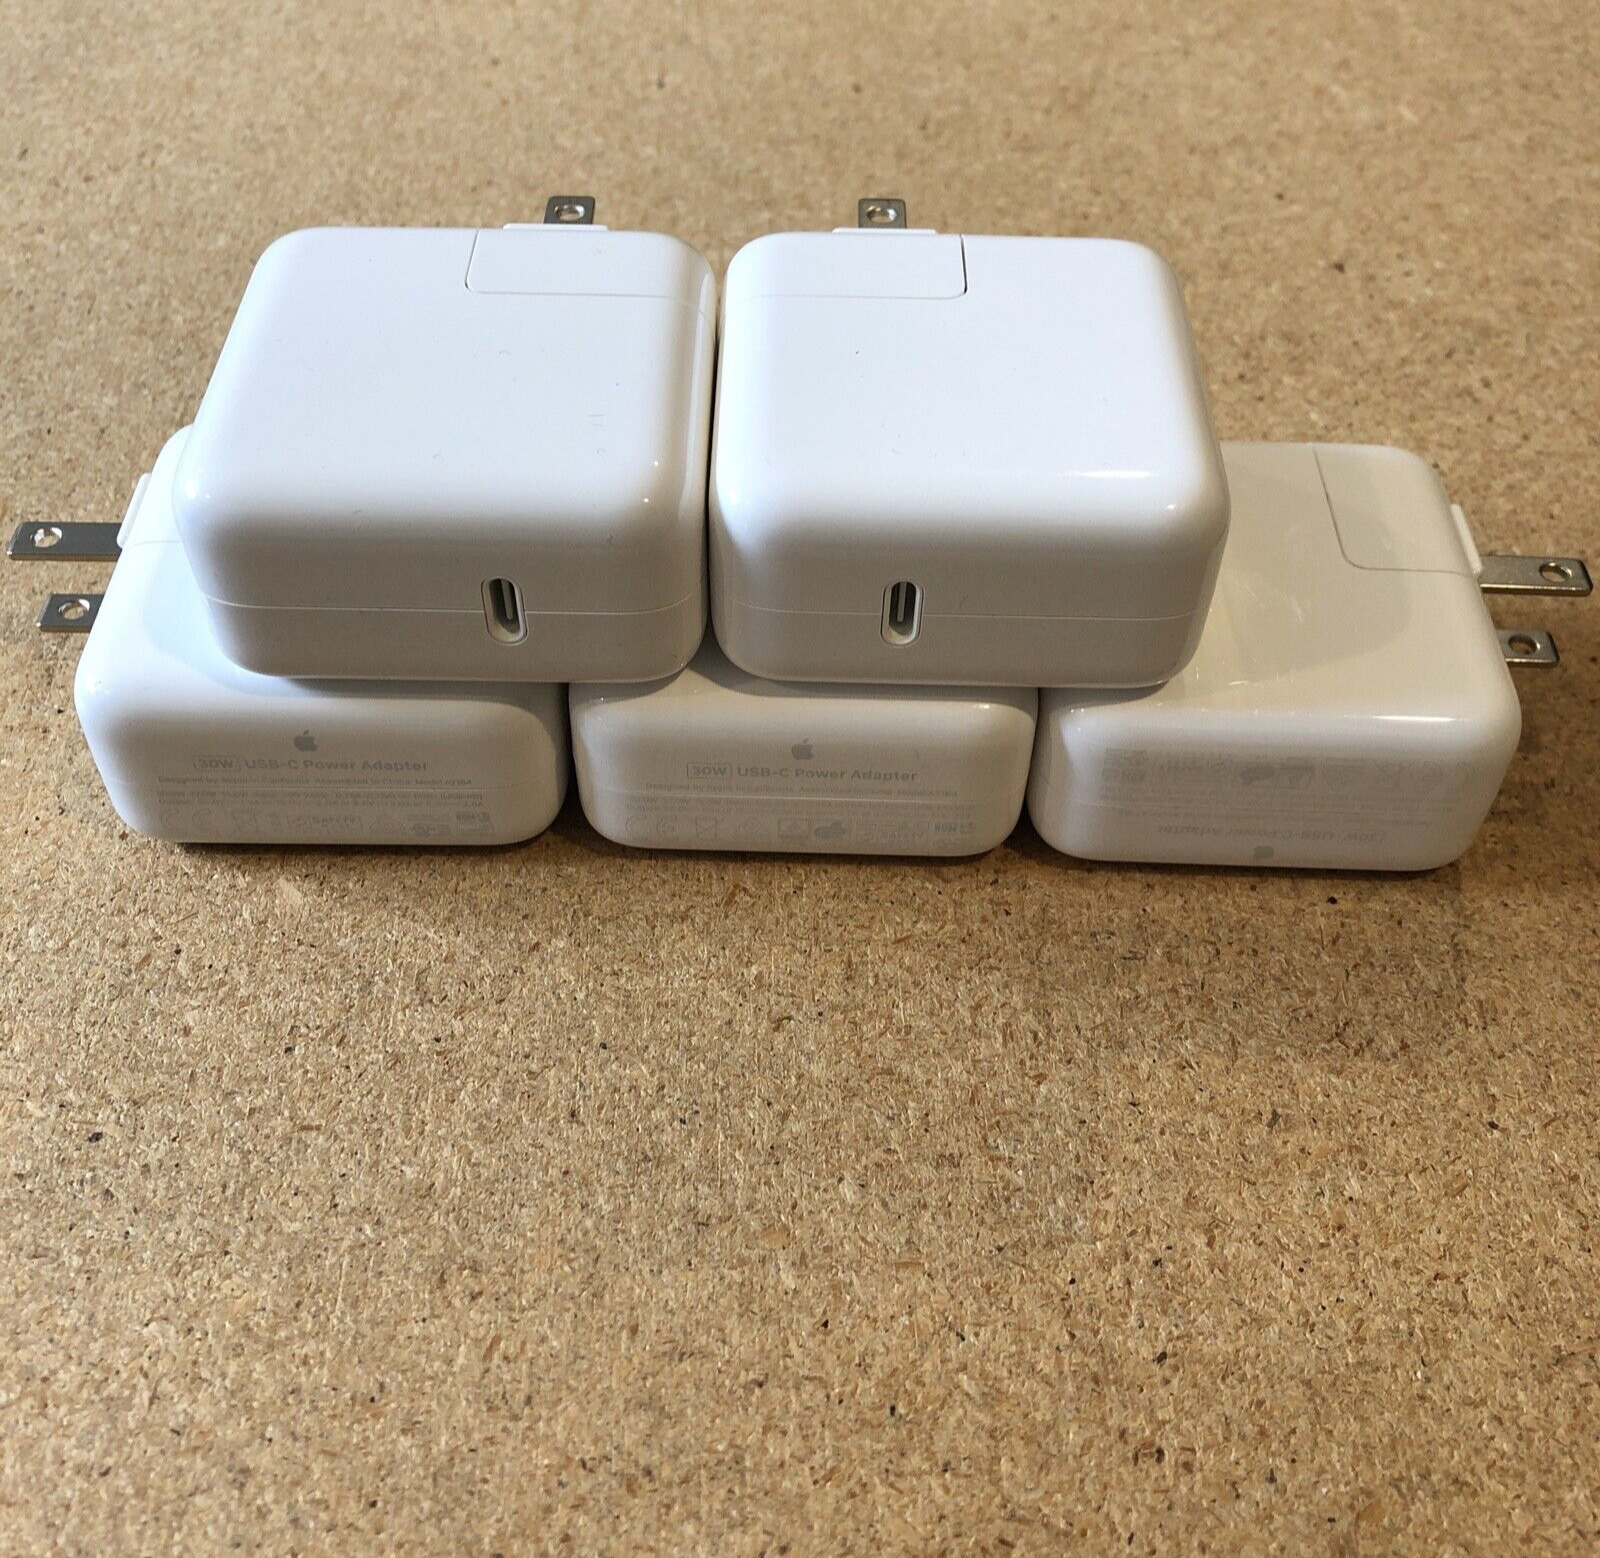 Lot 5X Apple OEM 30W USB-C Power Adapter Charger For Macbook Air / iPhone / iPad